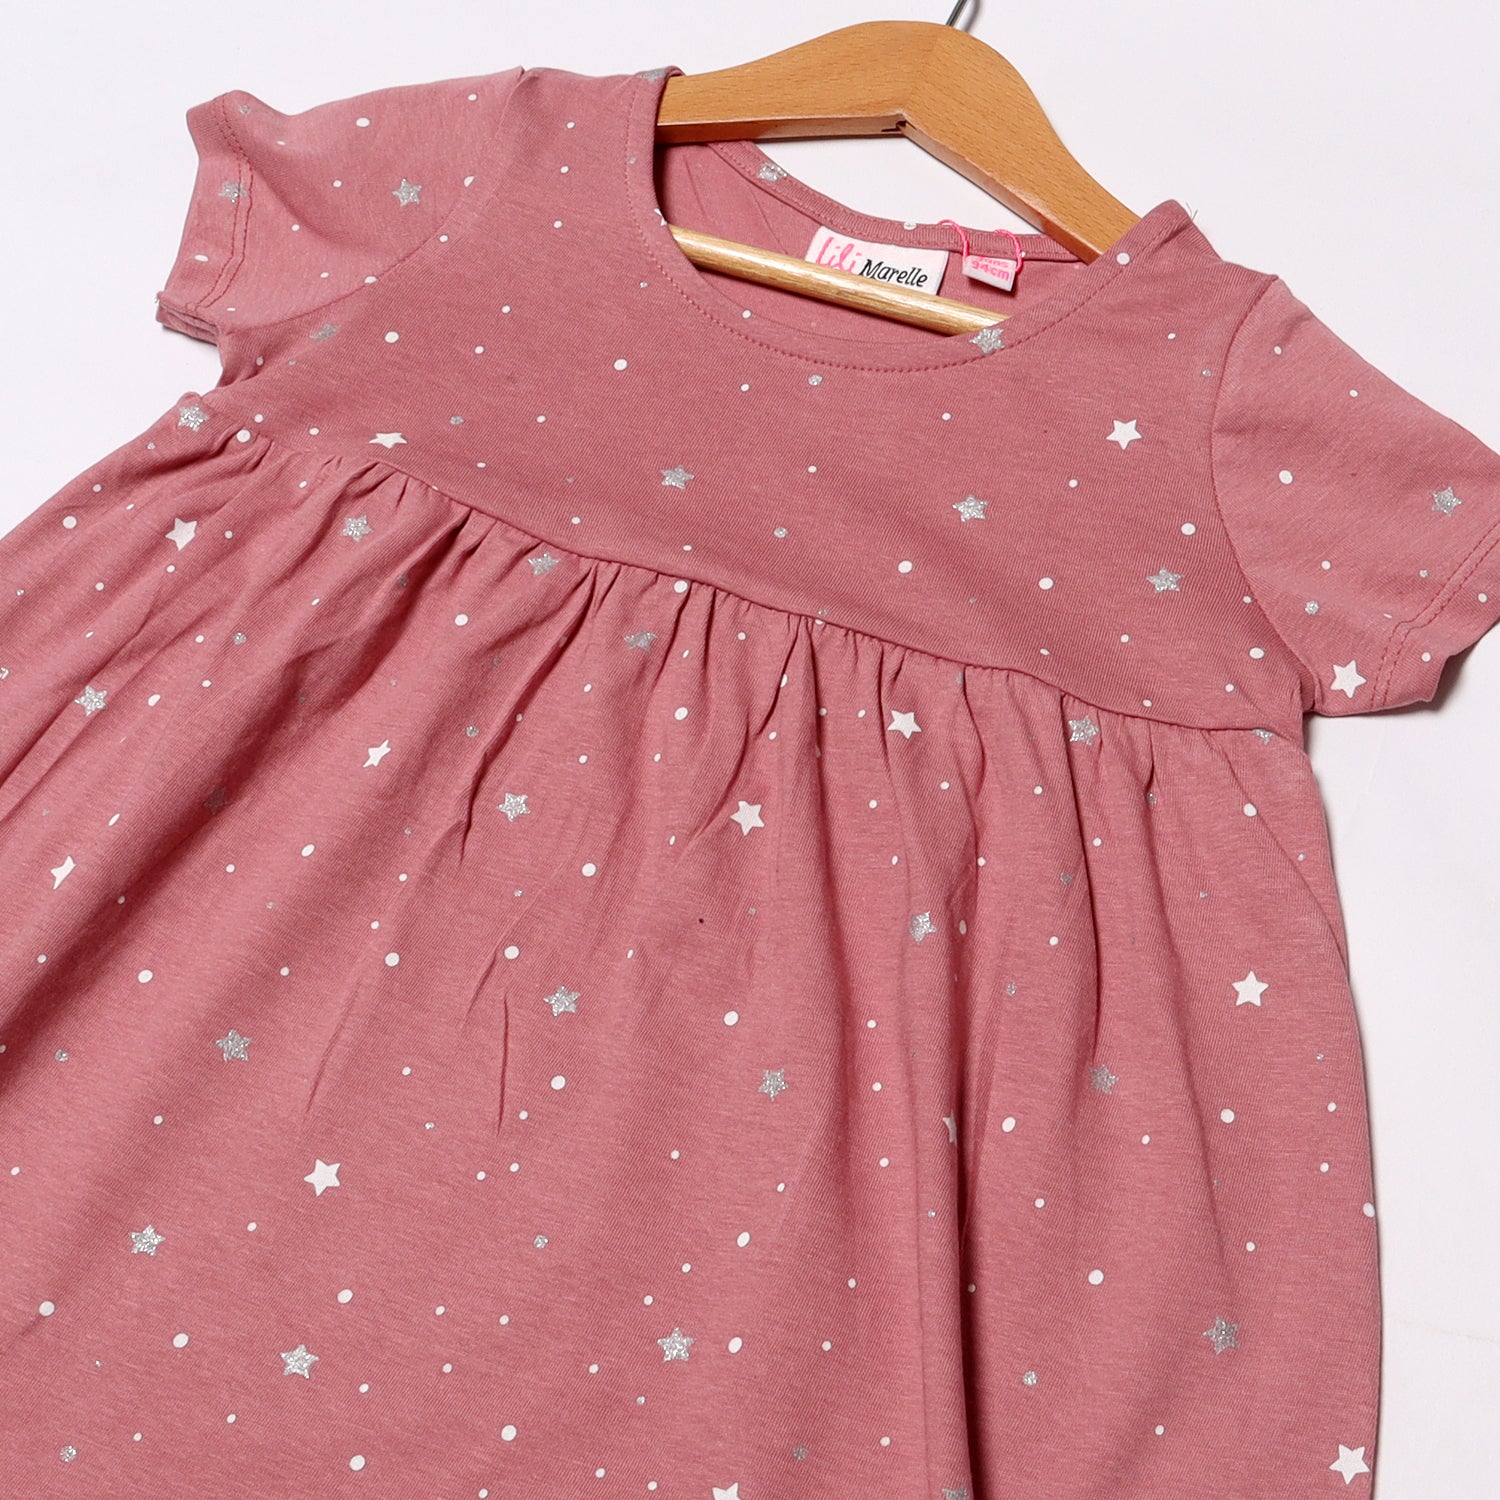 PINK STARS PRINTED FROCK FOR GIRLS